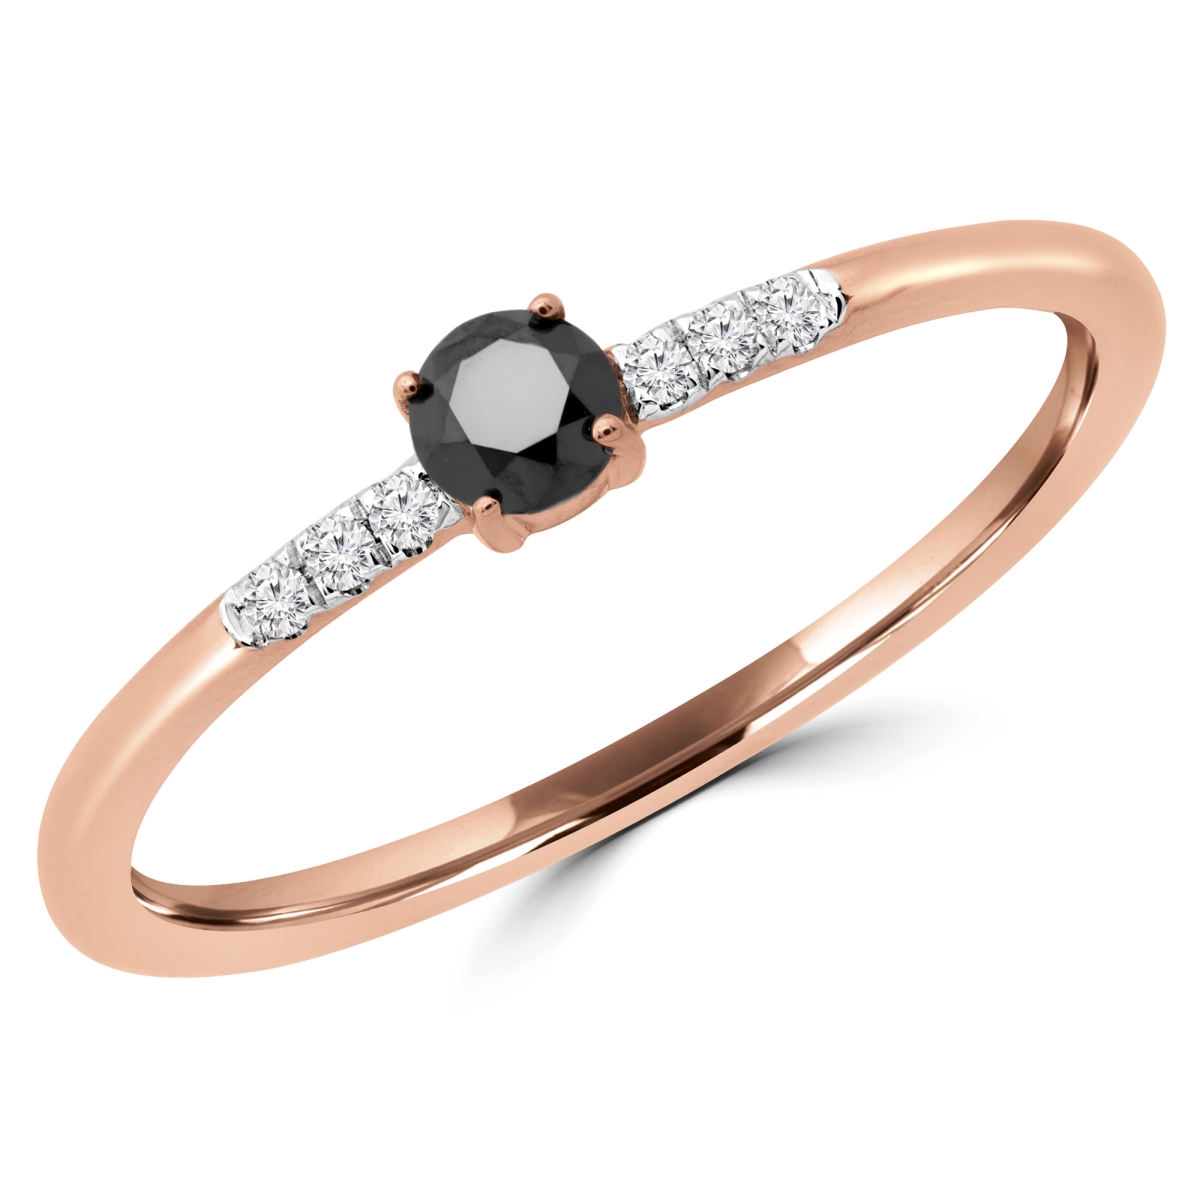 Picture of Majesty Diamonds MDR190079-4.5 0.16 CTW Round Black Diamond Bezel Set Cocktail Ring in 14K Rose Gold - Size 4.5